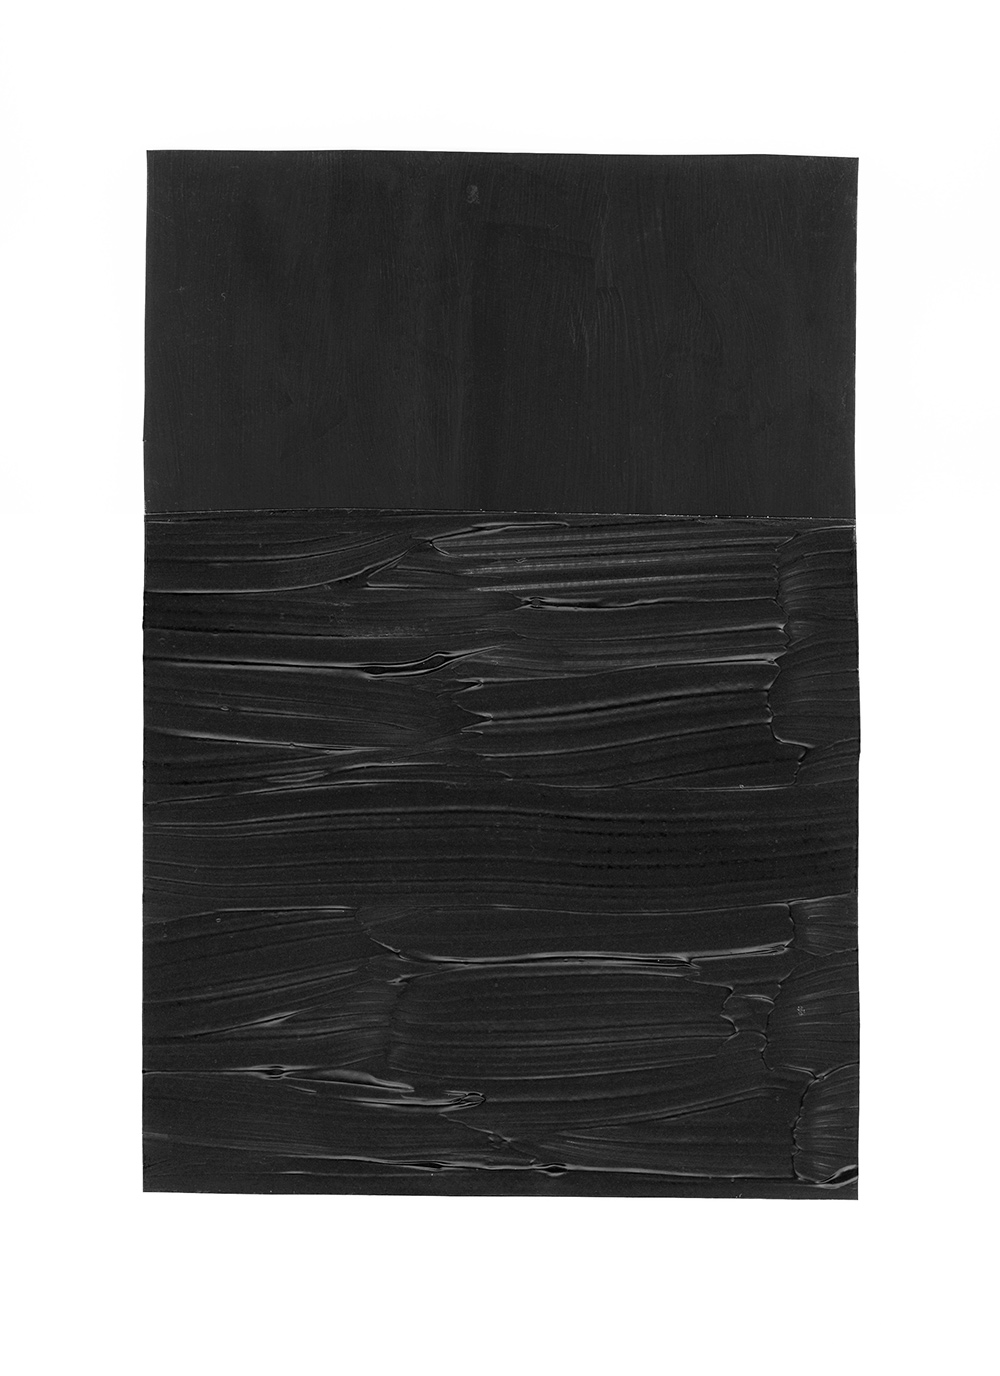 inspired by pierre soulages, no. 1